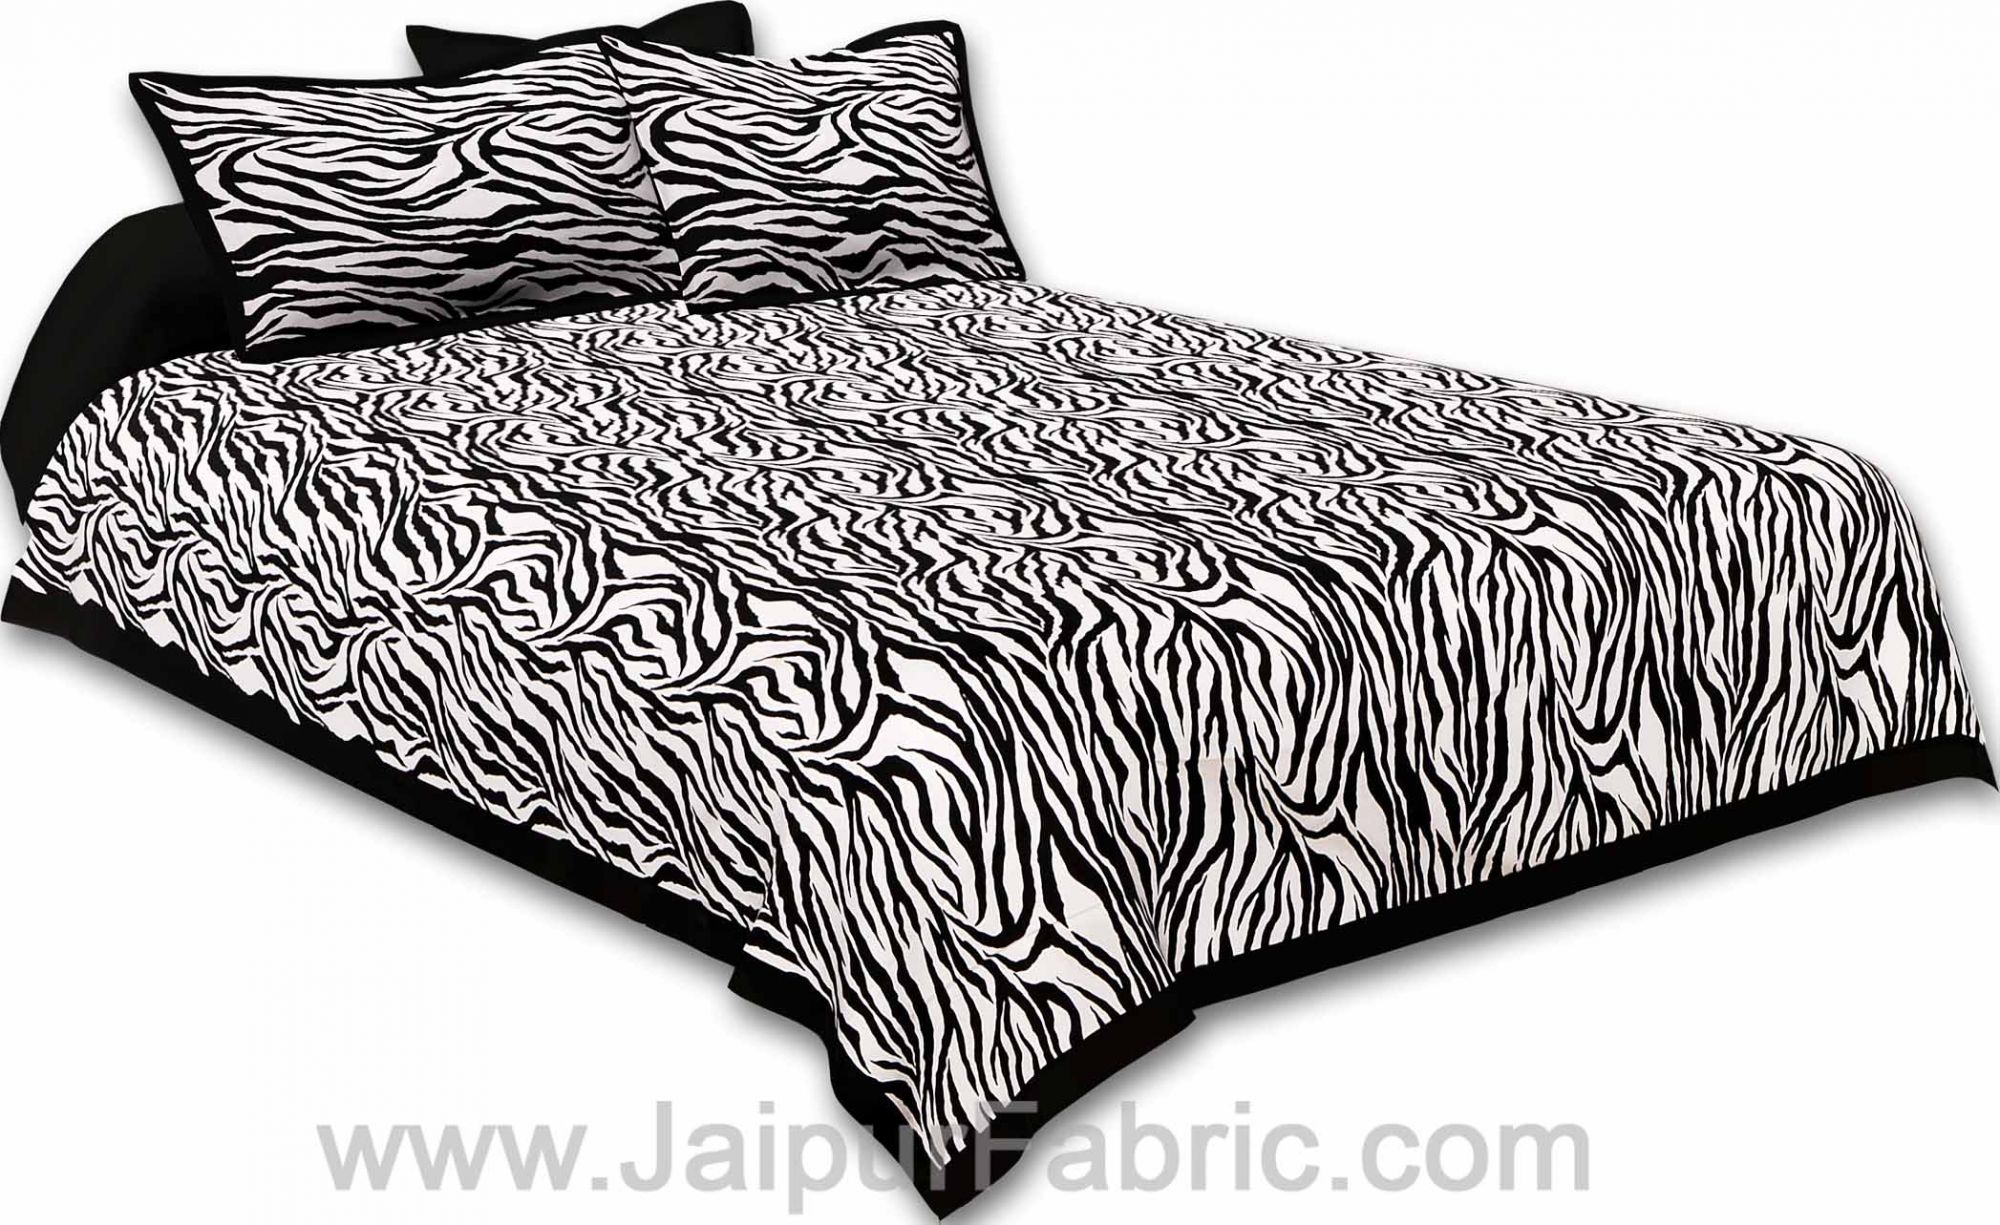 COMBO63- Set of 1 Double Bedsheet and  1 Single Bedsheet With  2+1 Pillow Cover